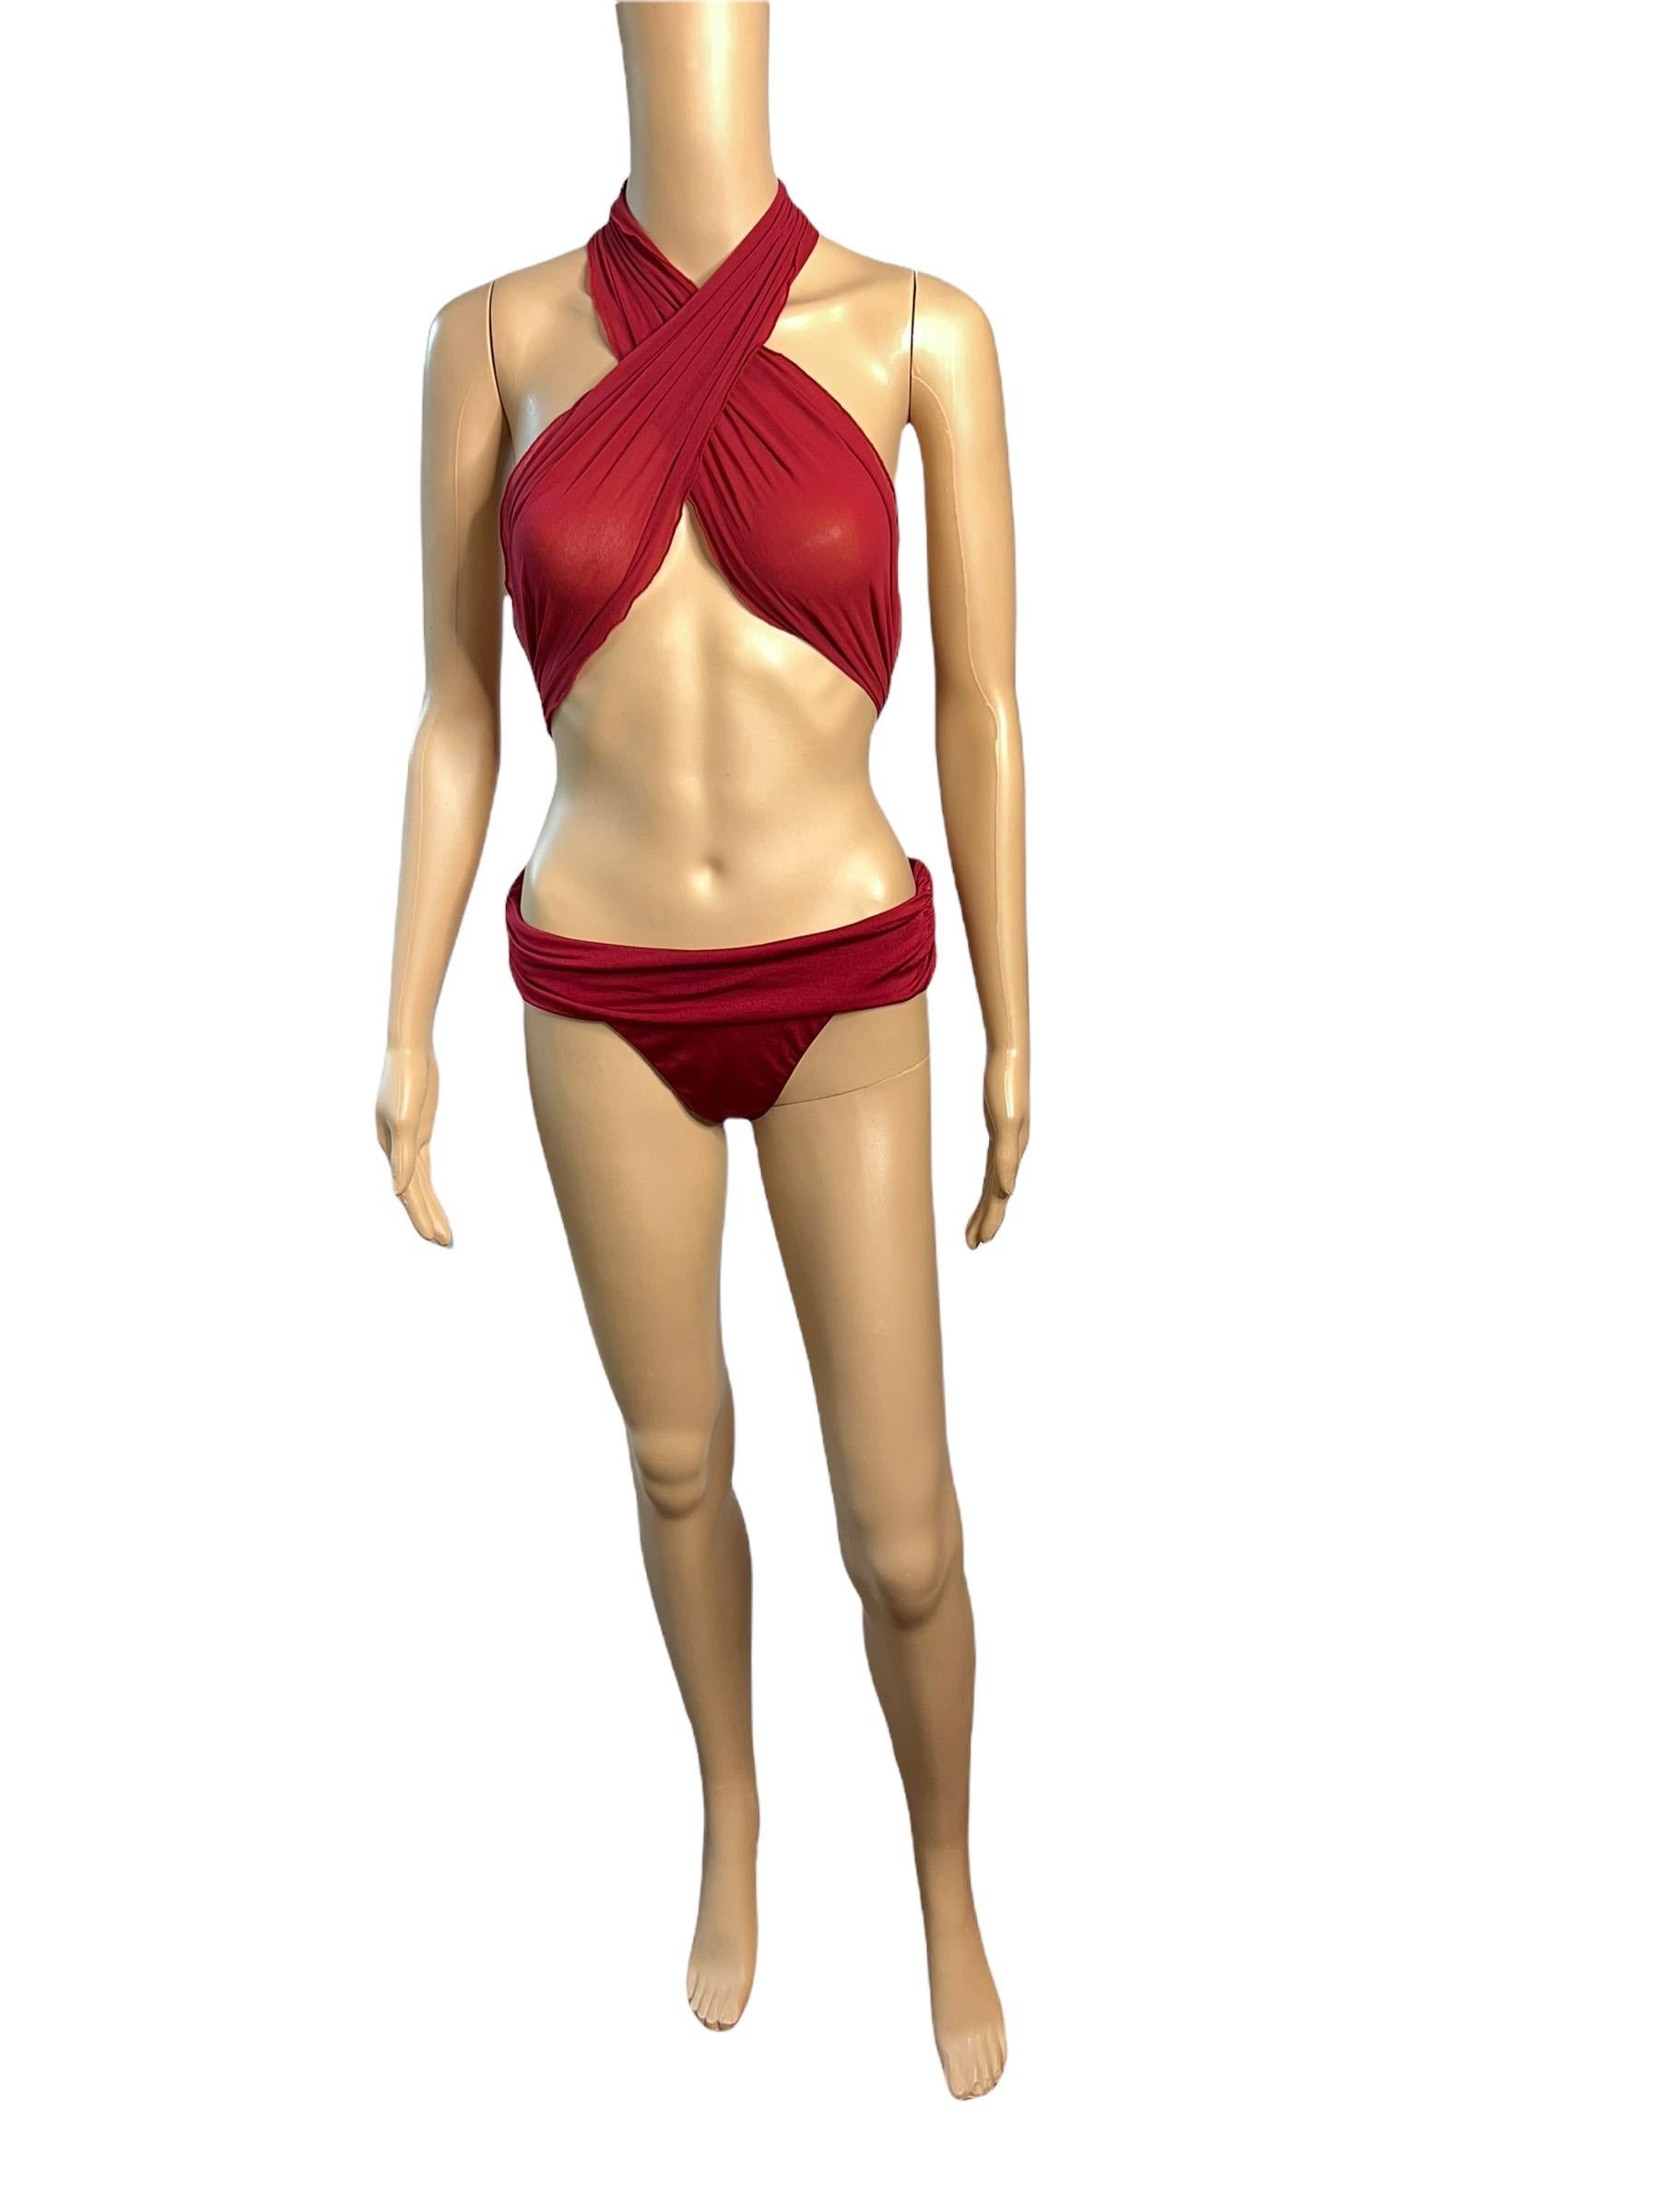 Red Tom Ford for Gucci S/S 2001 Runway Sheer One Piece Bodysuit Swimsuit Swimwear 